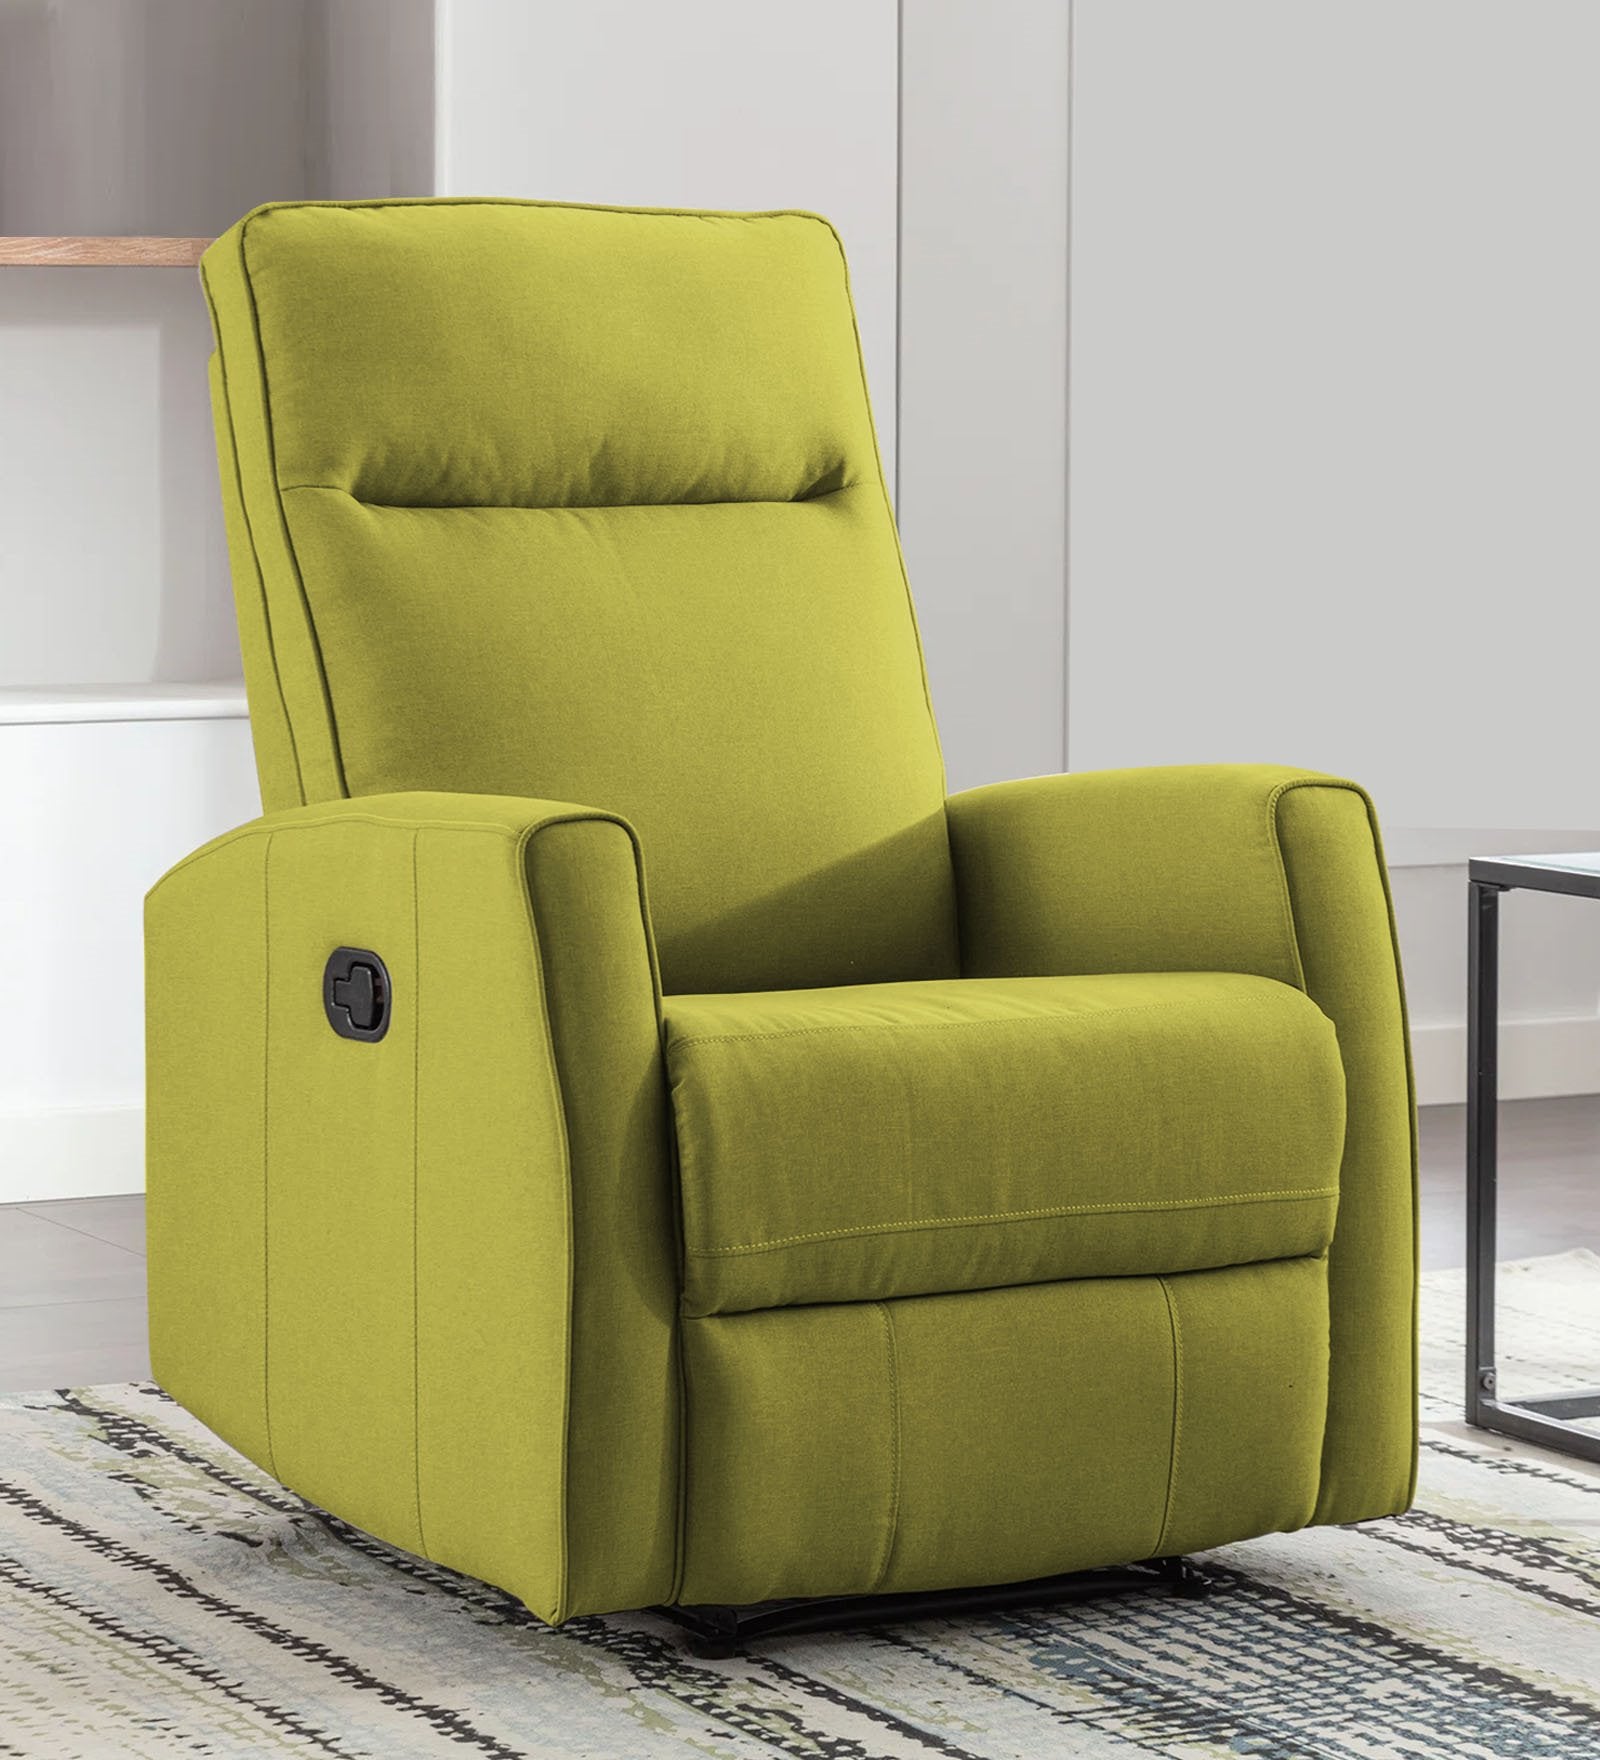 Logan Fabric Manual 1 Seater Recliner In Parrot Green Colour